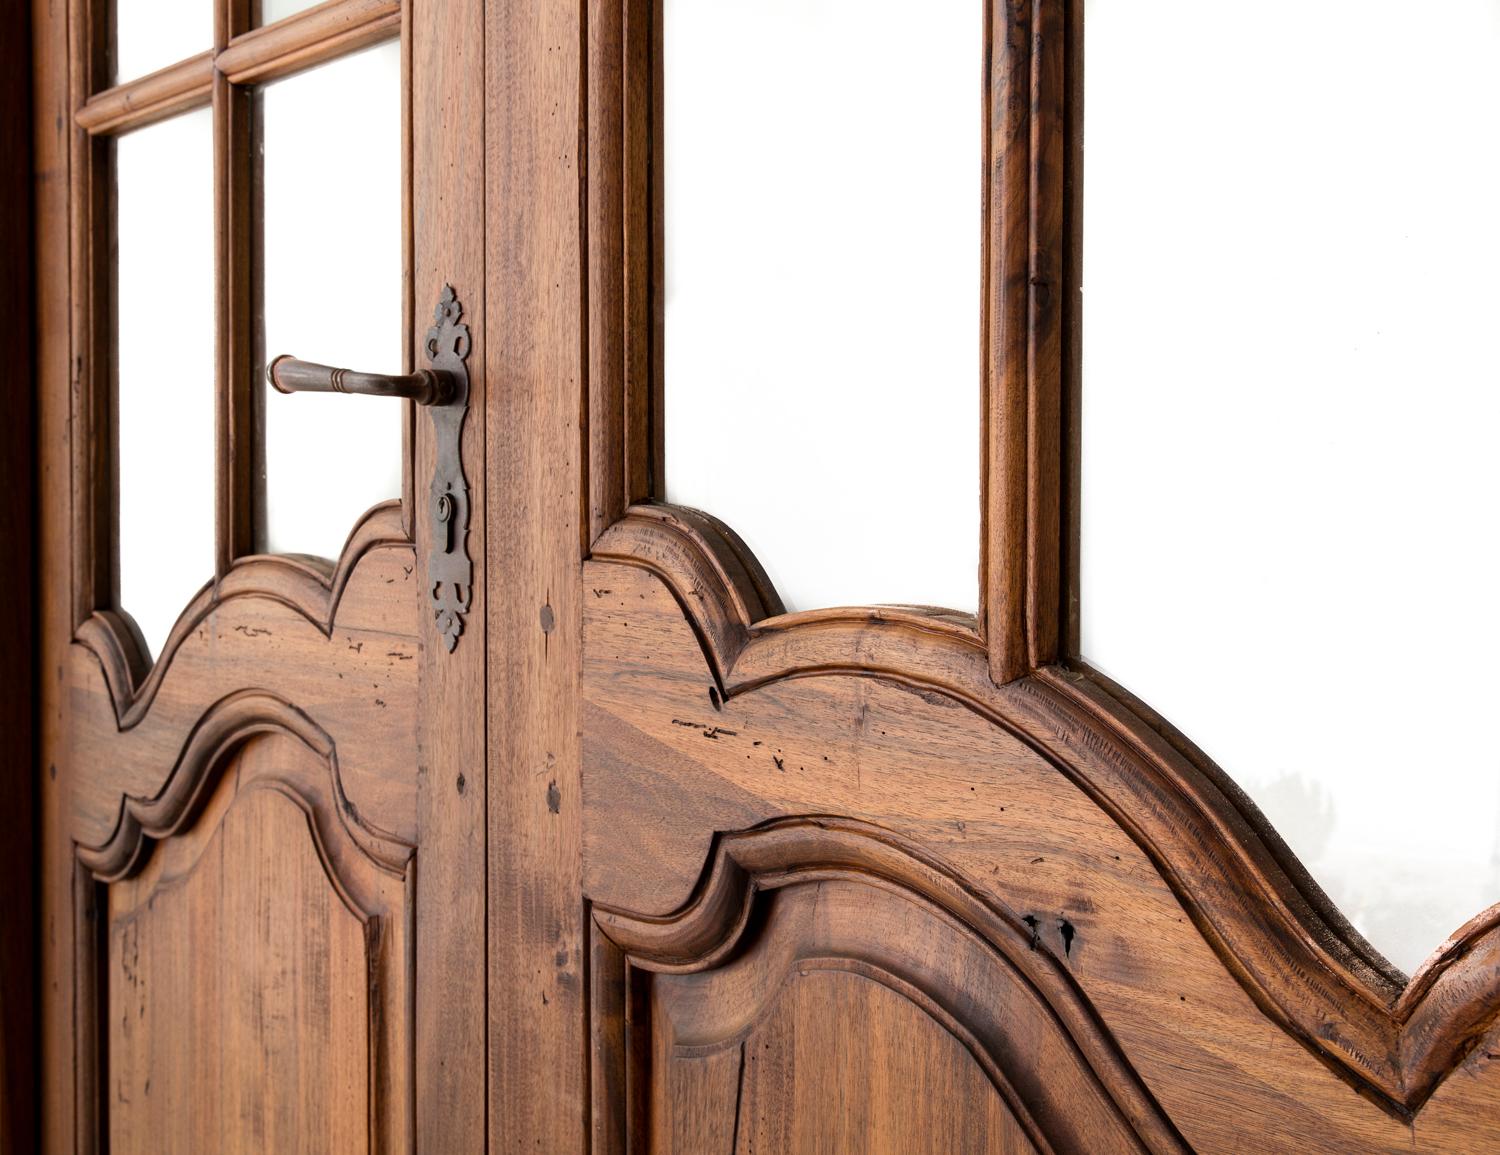 Newly constructed Louis XV style walnut entry doors made by Provençale artisans using traditional methods. This features beautiful paned glass and iron hardware typical of the Provençale style. Keys included. The left door is 28 inches wide and the